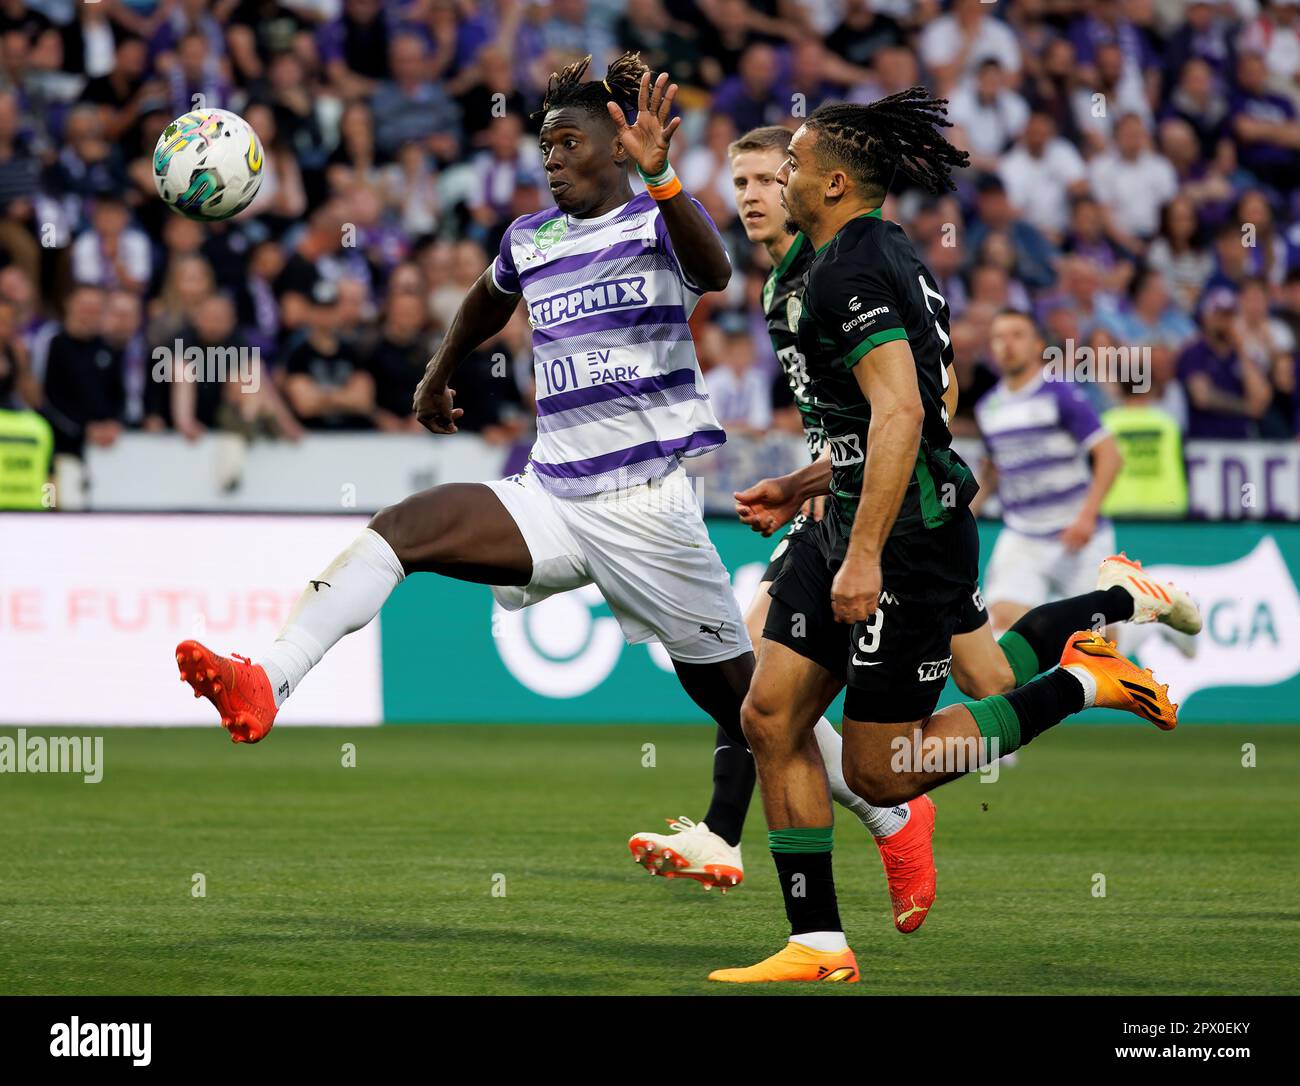 Claudiu Bumba of Kisvarda Master Good passes the ball in front of News  Photo - Getty Images